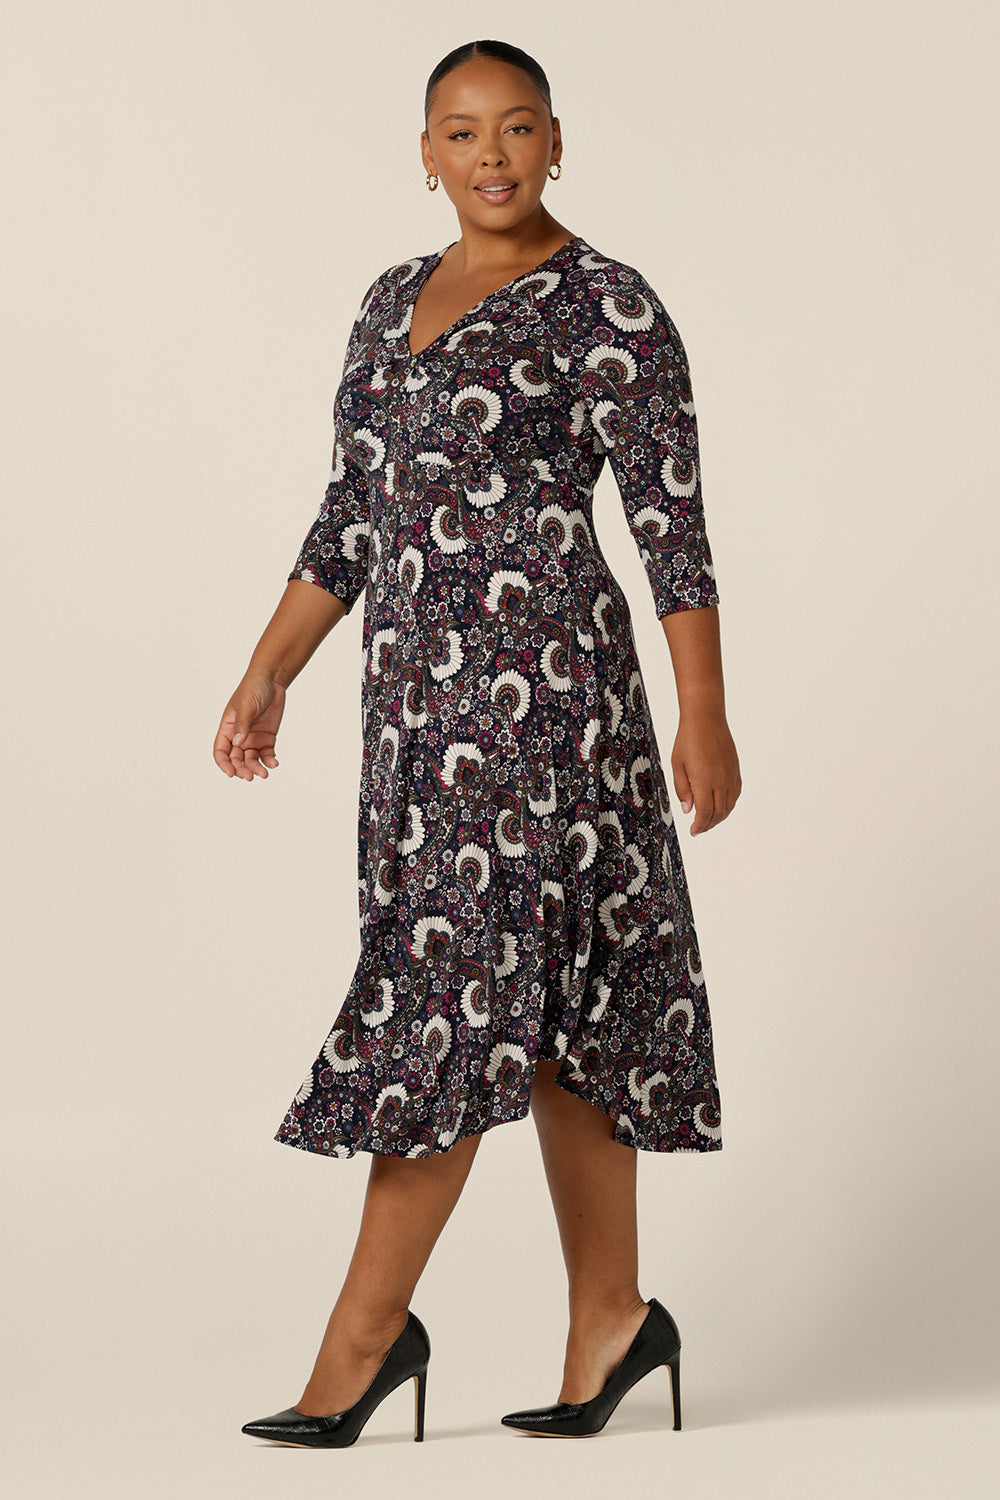 A size 18, plus size woman wears a 3/4 sleeve empire line dress with twist front bodice and dipped, calf length hem. Made in Australia by Australian and New Zealand women's clothing brand, L&F, this paisley print jersey dress is available to shop in an inclusive 8 to 24 size range.